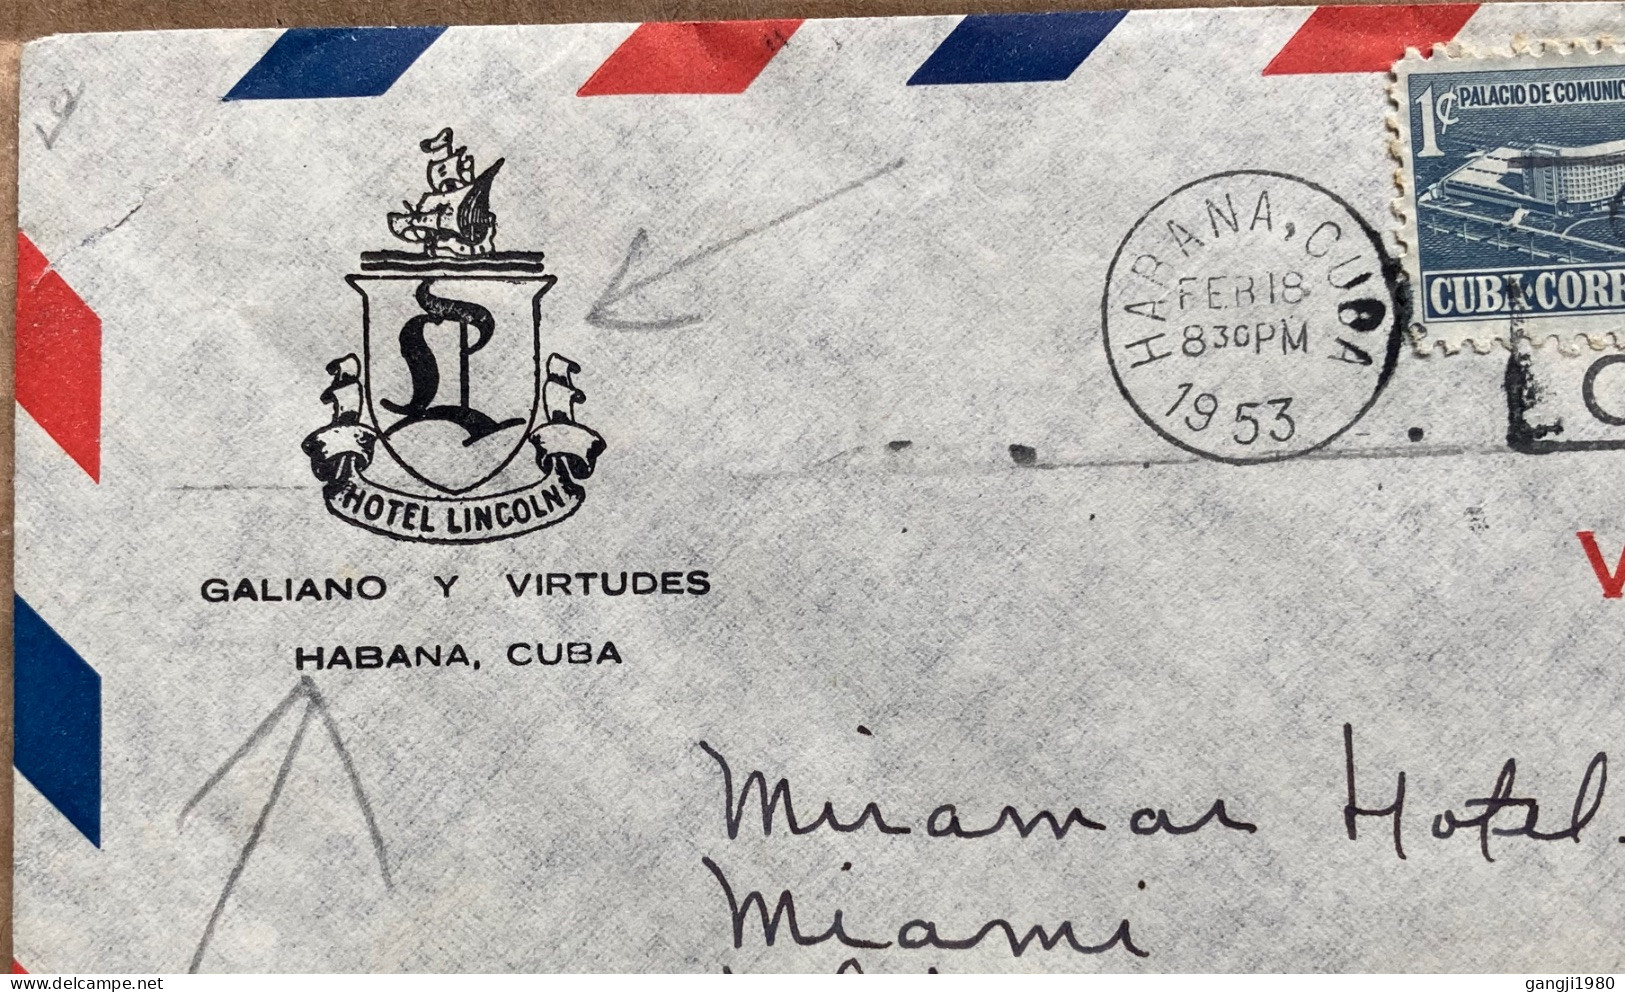 CUBA 1953, ILLUSTRATE COVER, HOTEL LINCOLN, USED TO USA, COOPERATE FOR CENSUS, MACHINE SLOGAN, BUILDING, AIR PLANE, HABA - Storia Postale